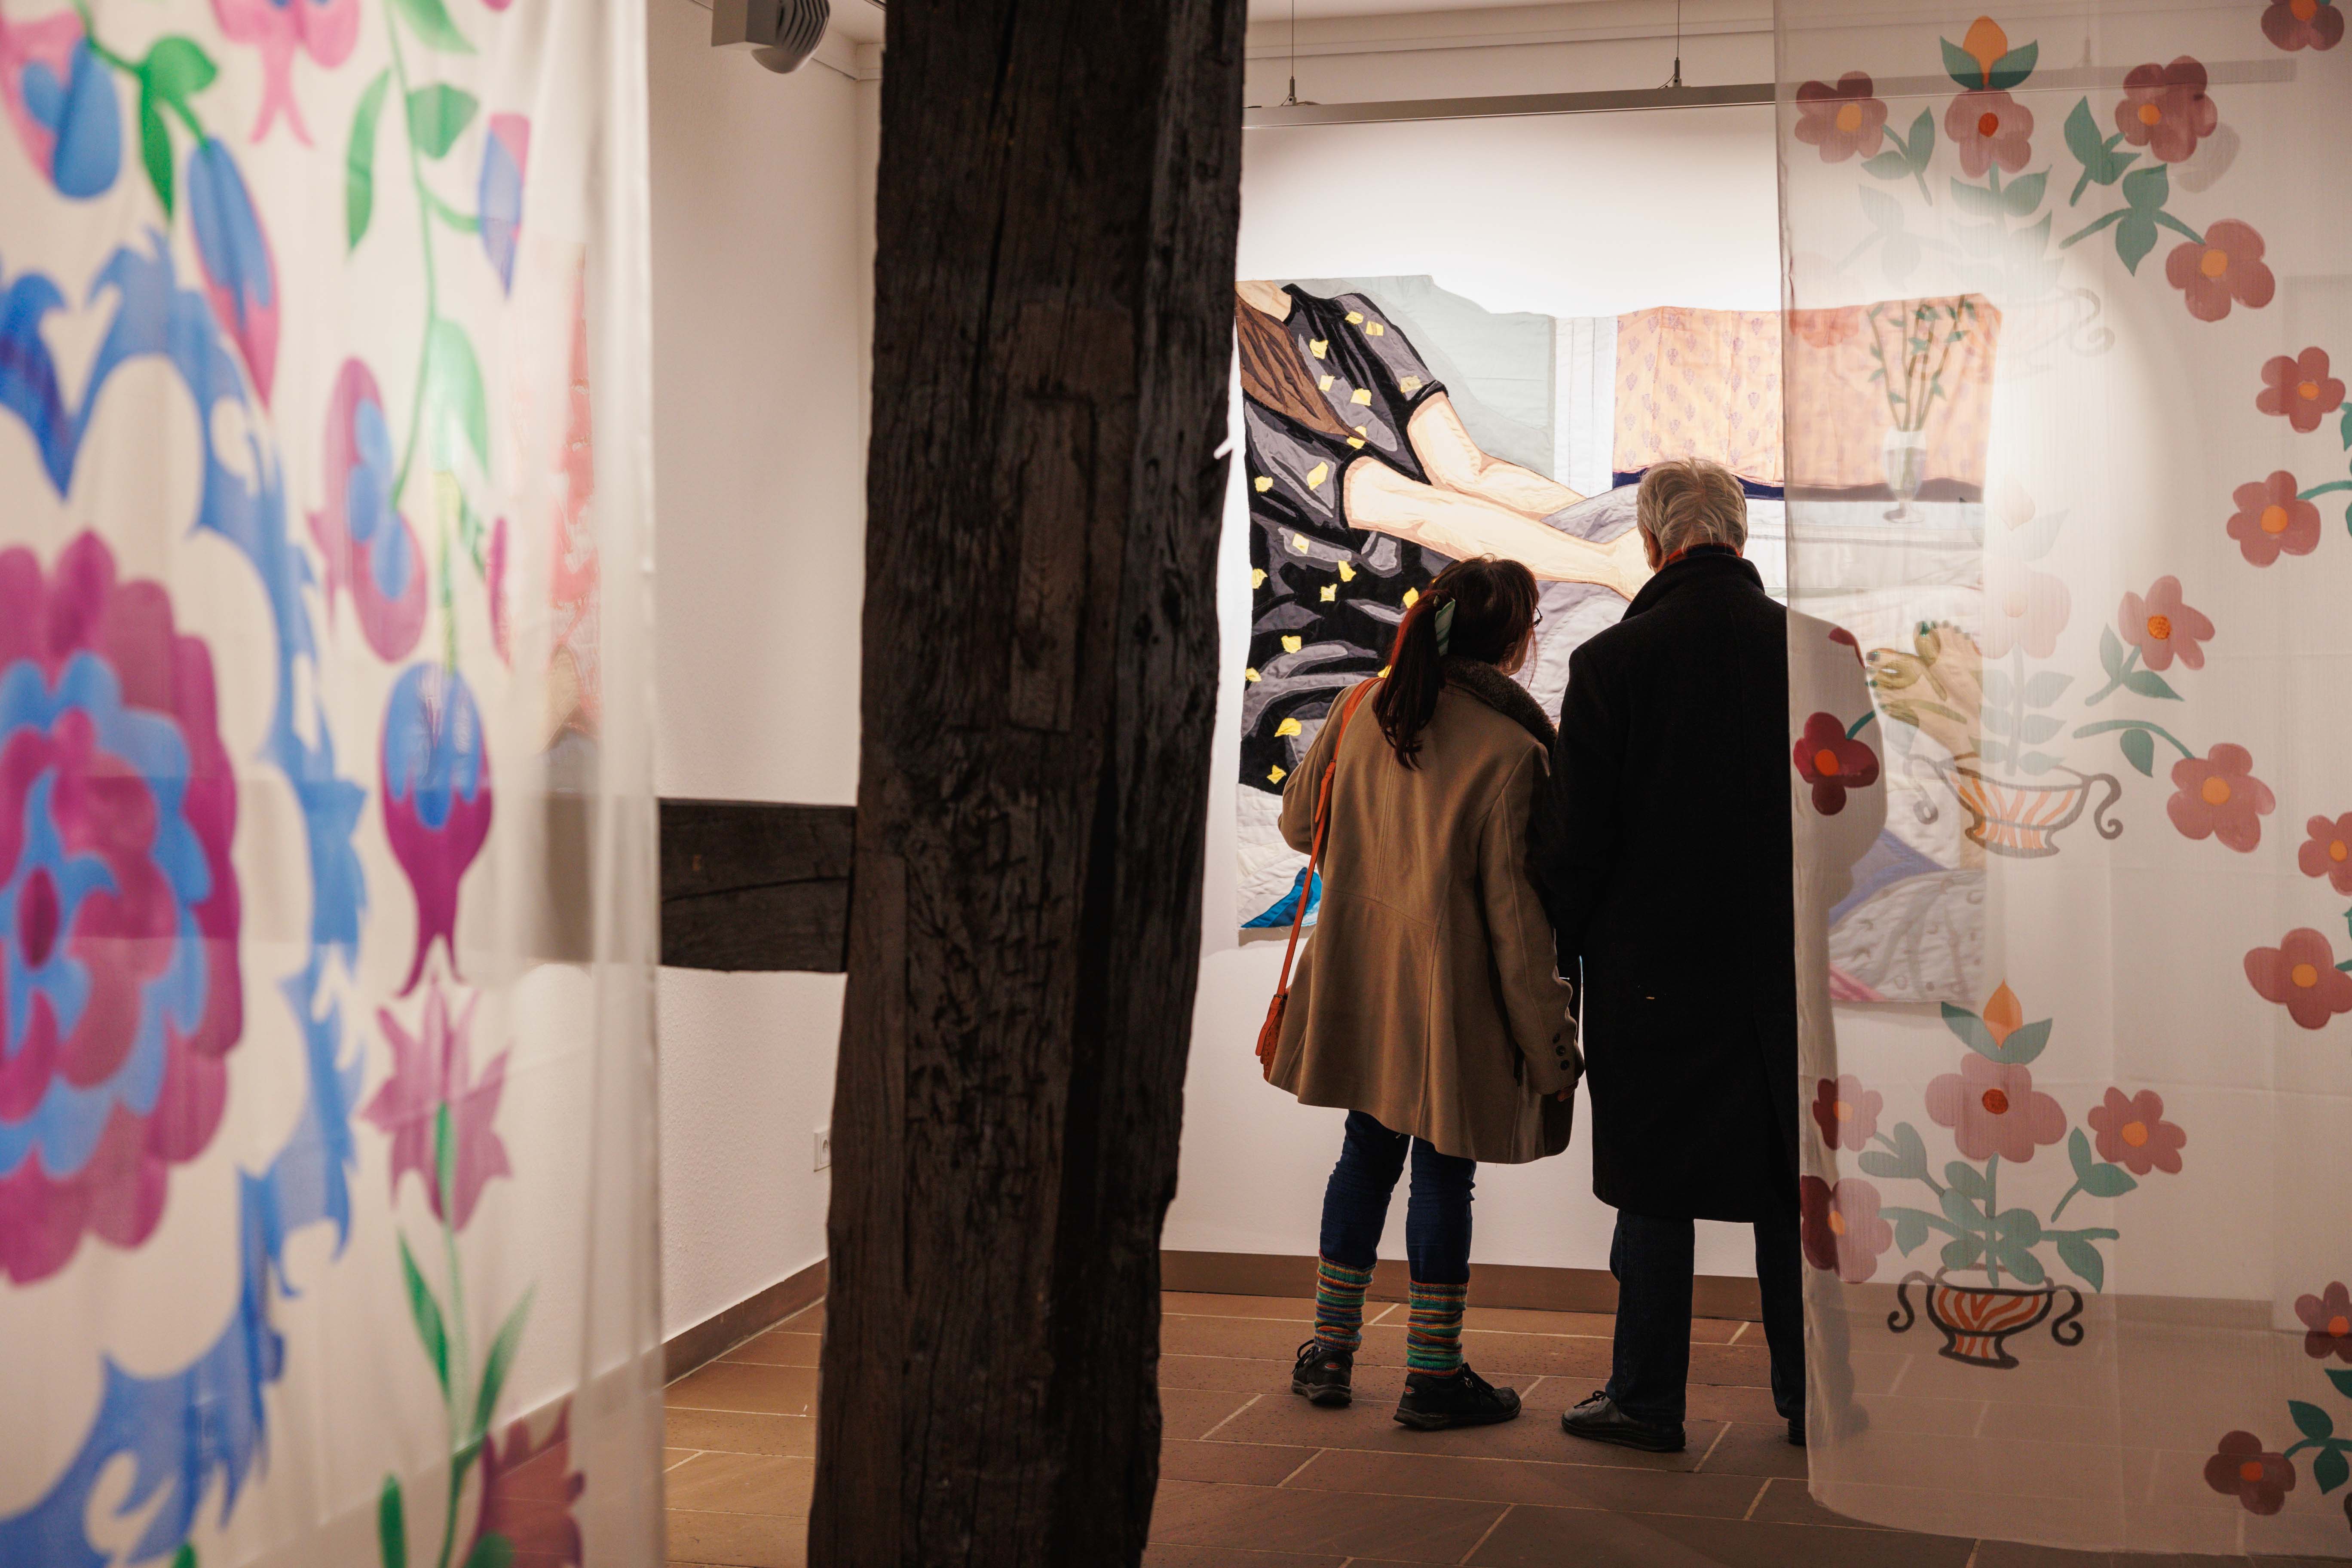 Two visitors in front of works by Hangama Amiri at the opening